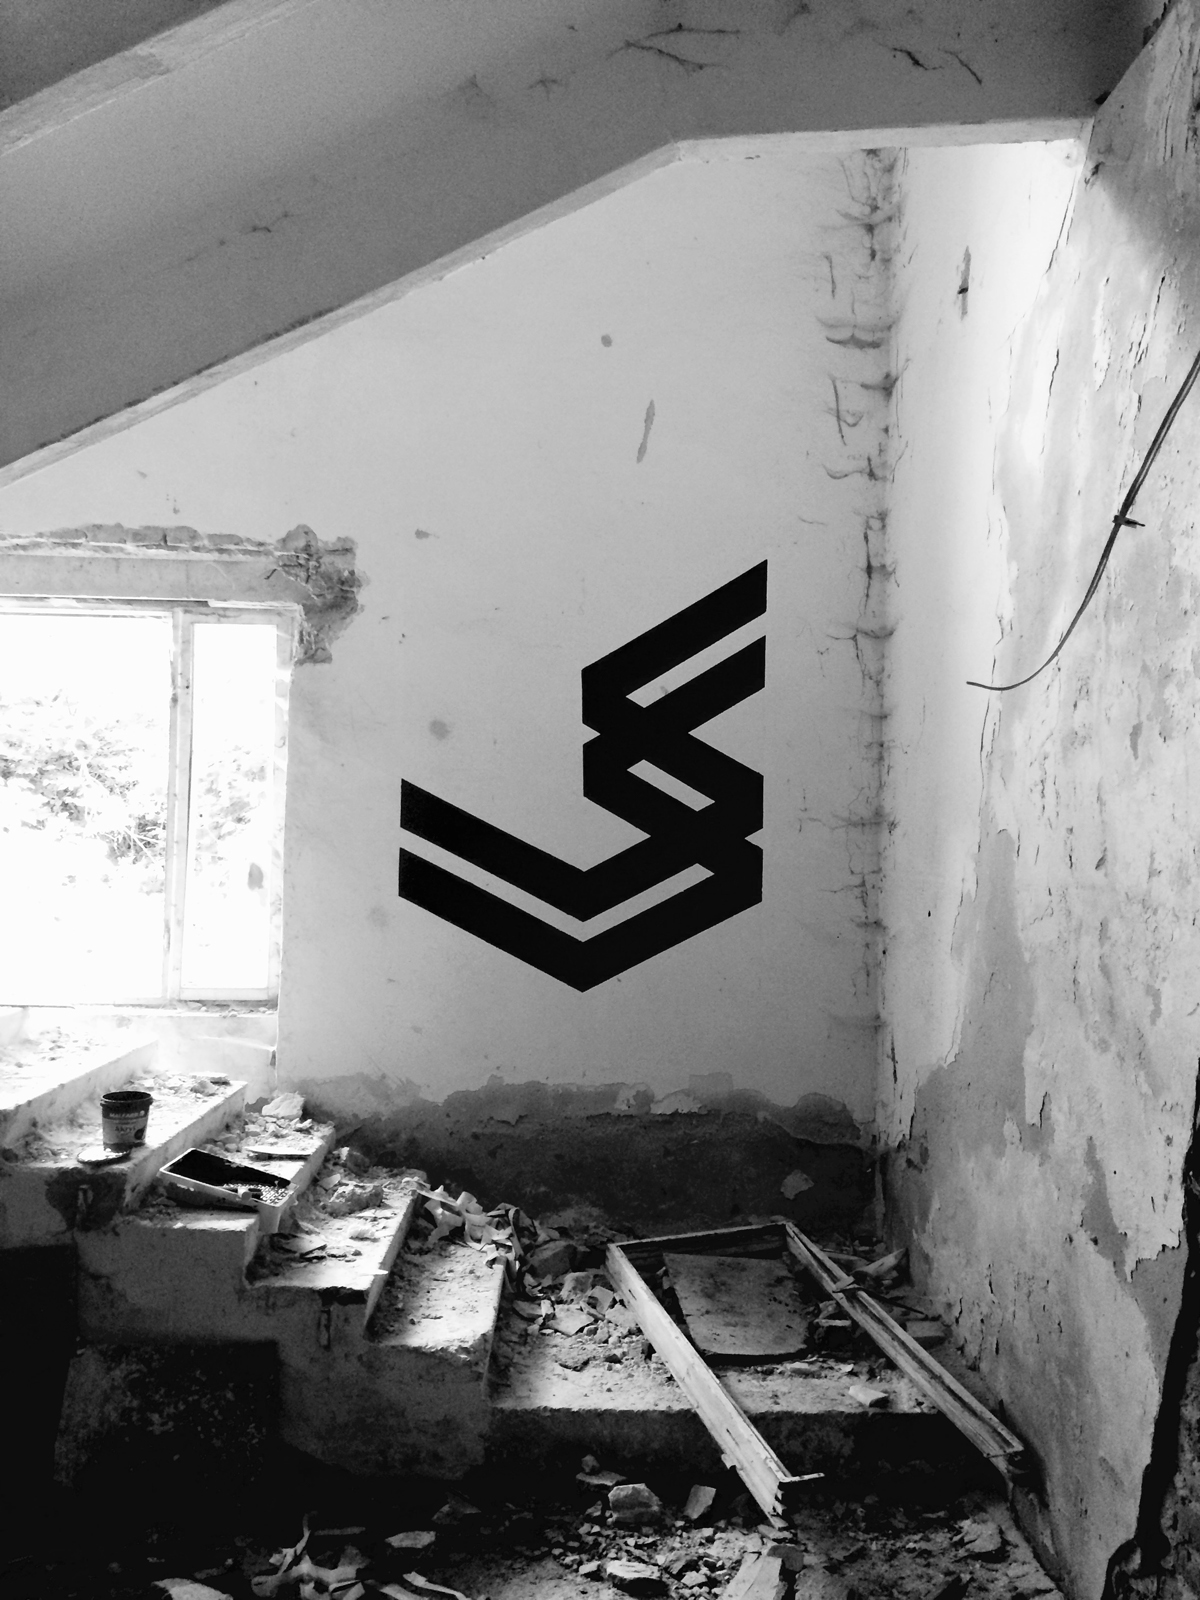 simek Mural geometry lines parallel Forms abstract shapes walls minimal